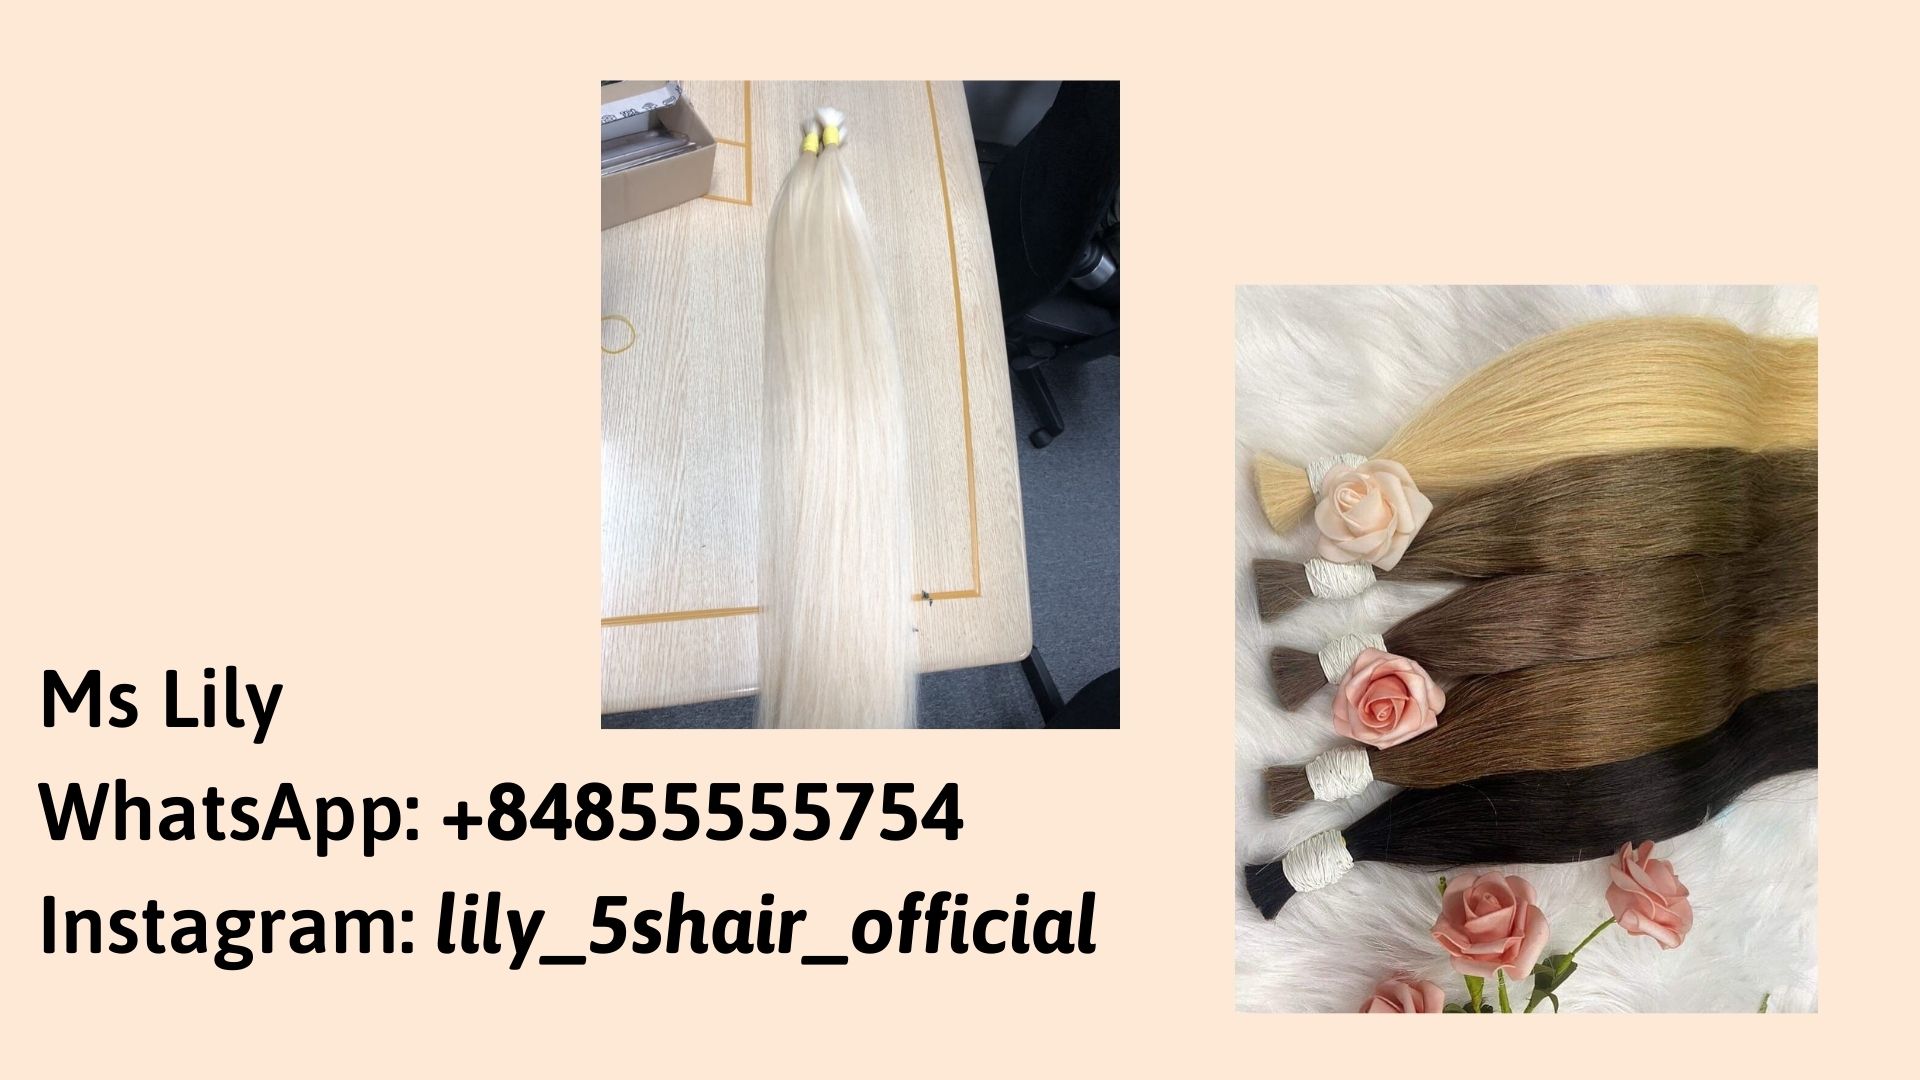 raw-vietnamese-hair-market-the-high-end-hair-supply-for-hair-extension-products-in-the-world-1